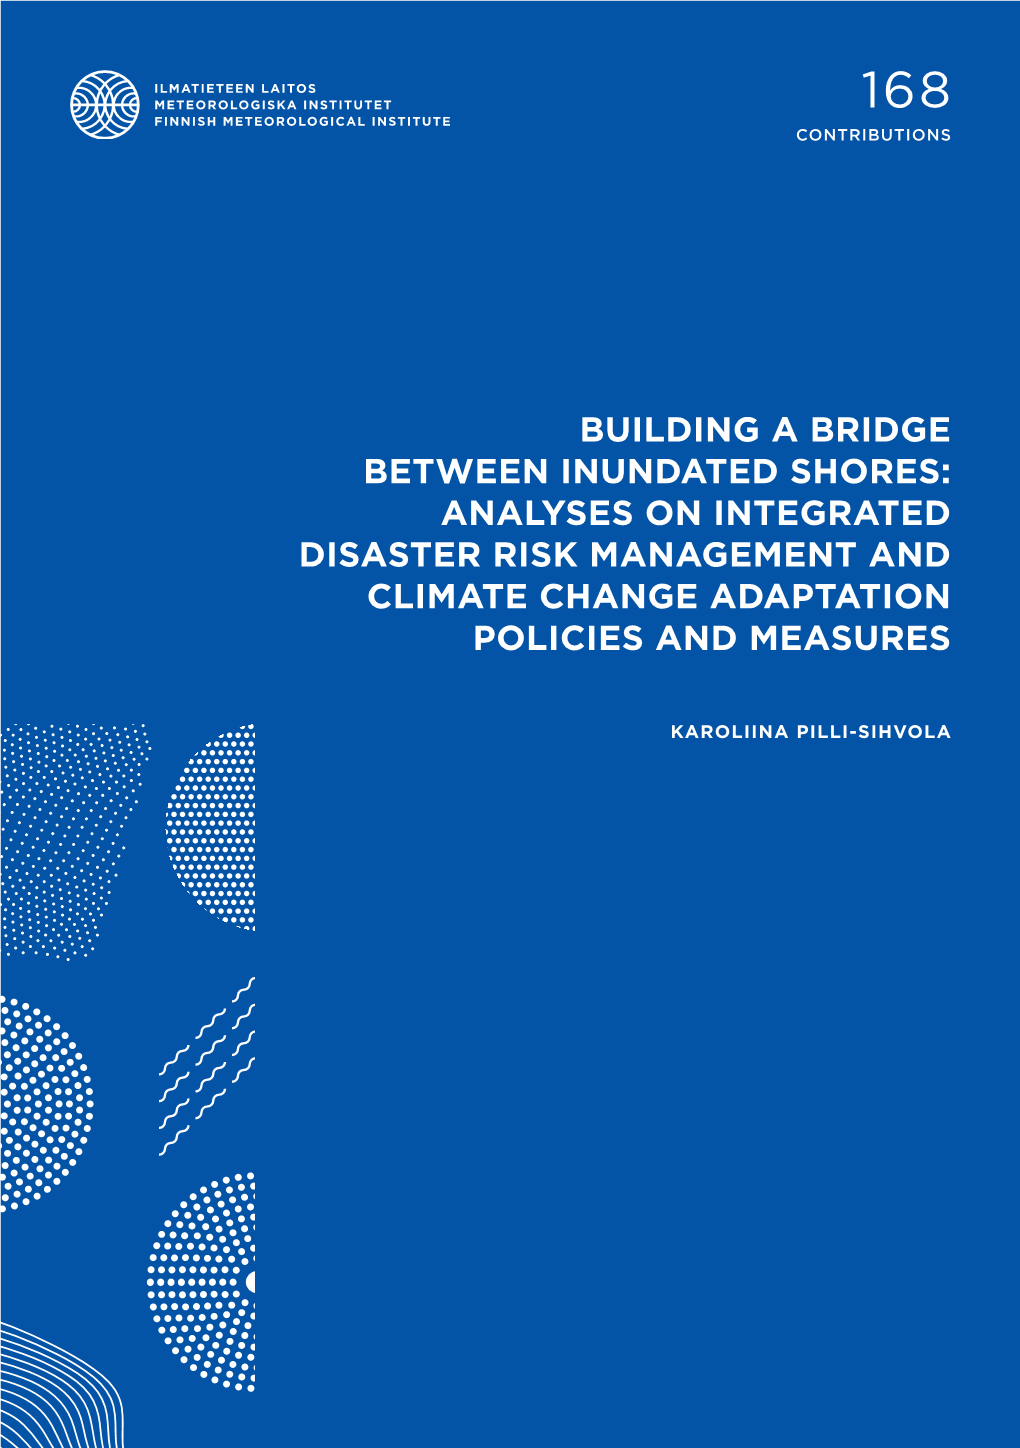 Analyses on Integrated Disaster Risk Management and Climate Change Adaptation Policies and Measures